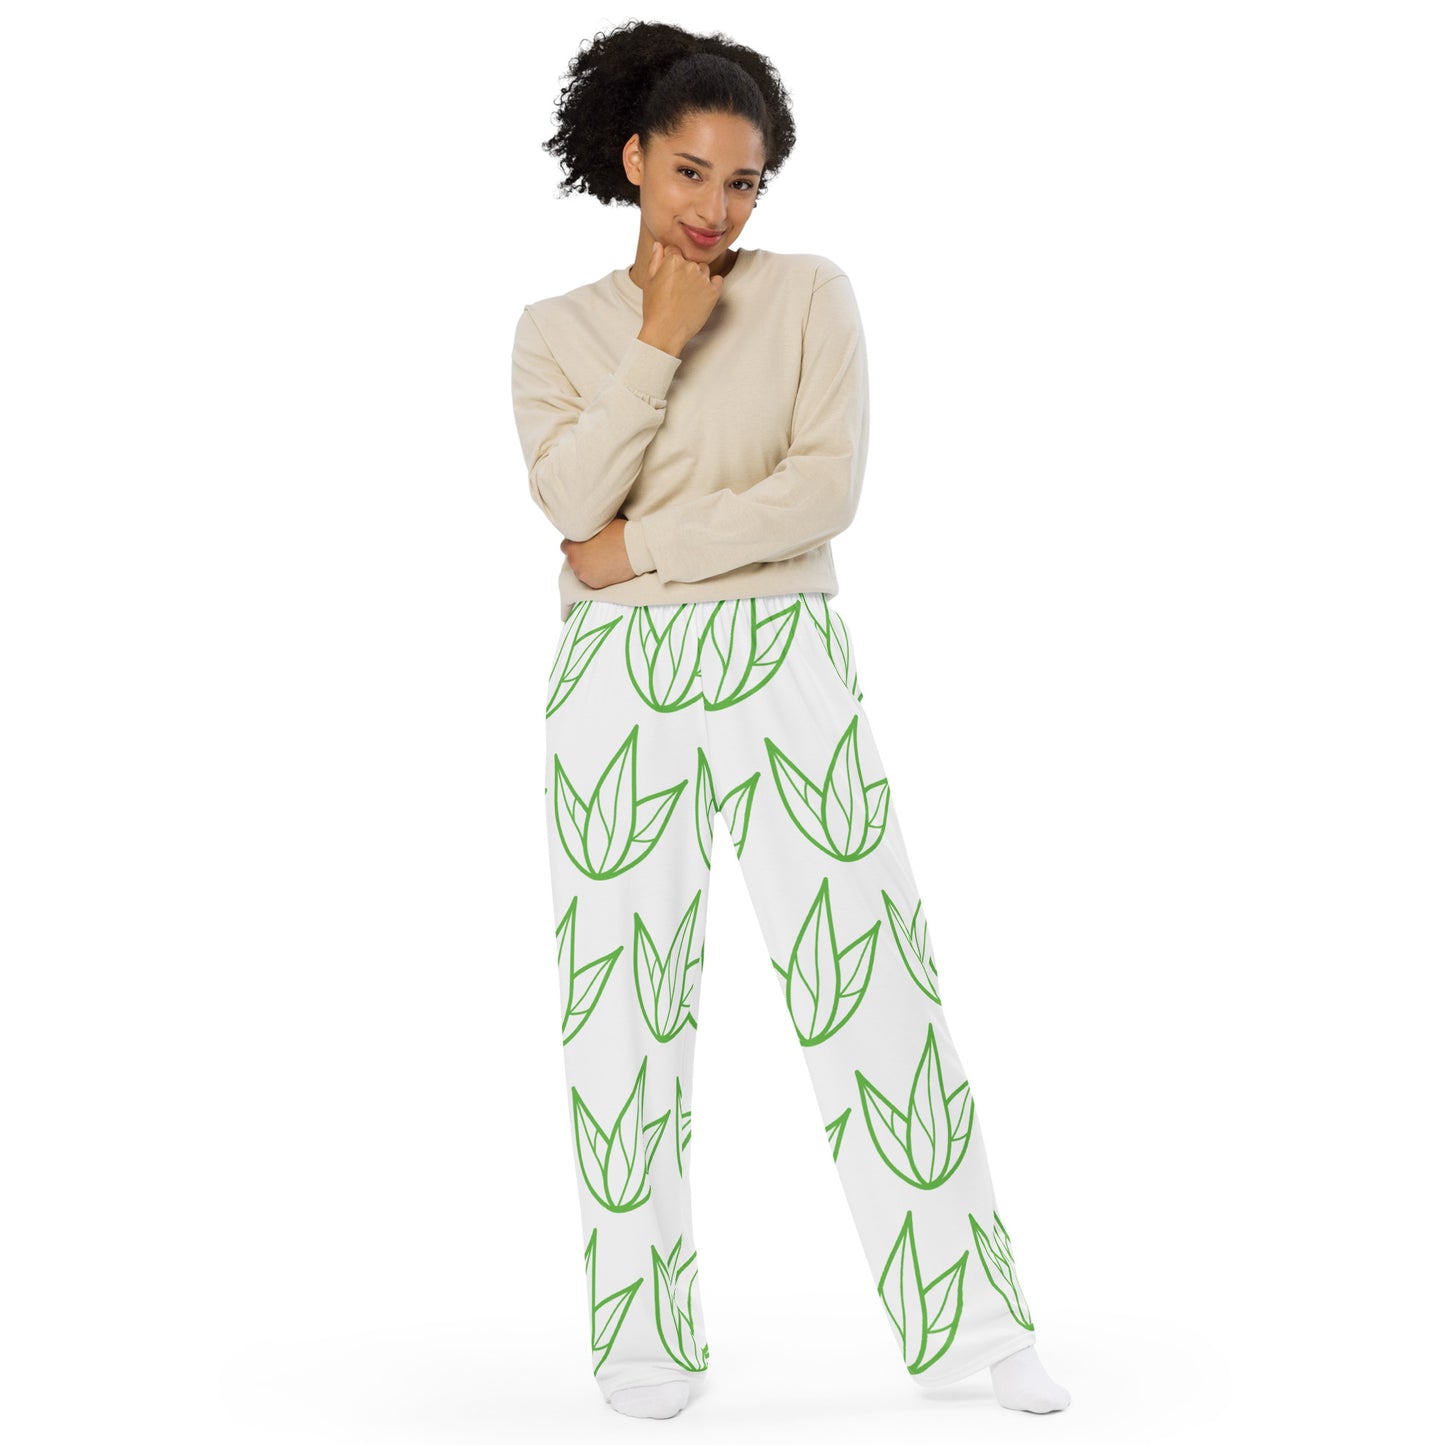 Vibrant Visions - Organic Health & Wellness - All-over HD print, unisex, Casual Lounge Wear, House Wear, Wide-leg Comfortable pants